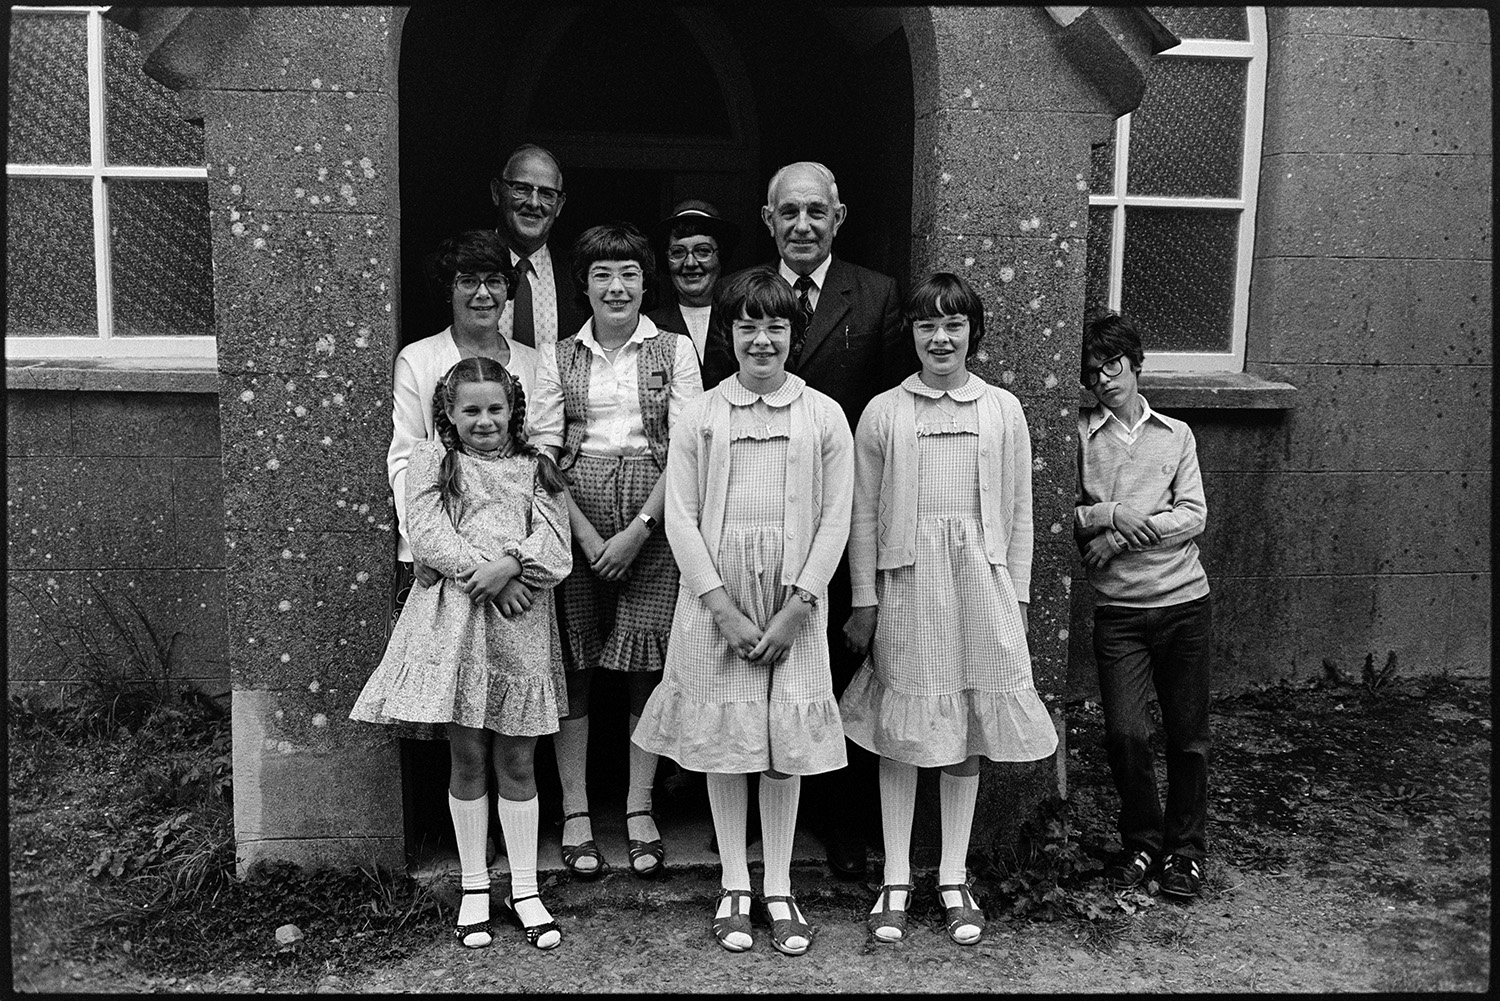 People posing after Chapel service, congregation. 
[A small group of men, women and children posing at the entrance to Langham Chapel after a service.]